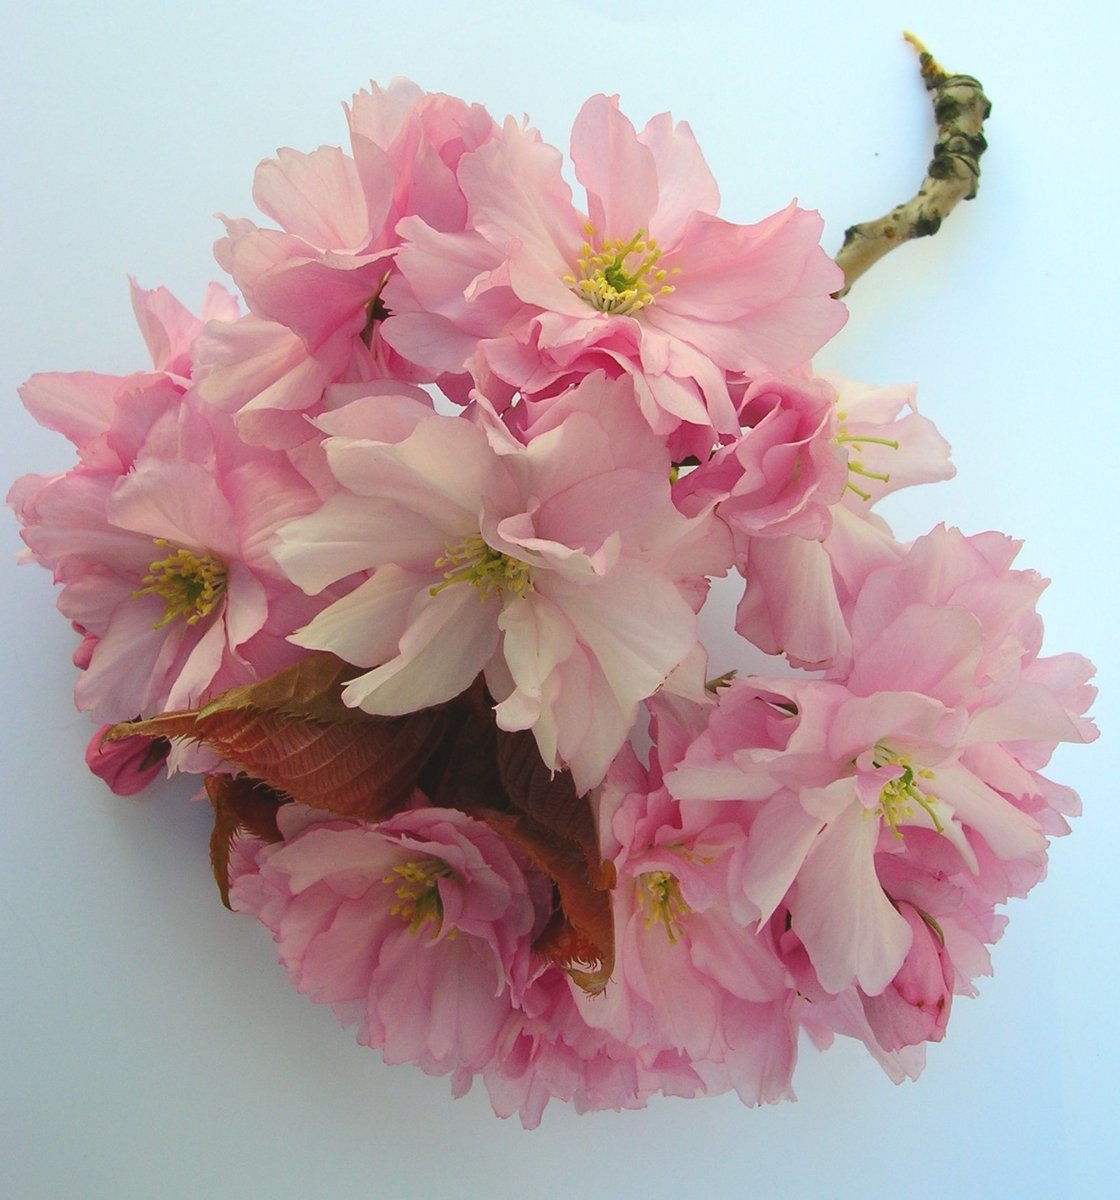 pink flowers with buds on white surface with white wall